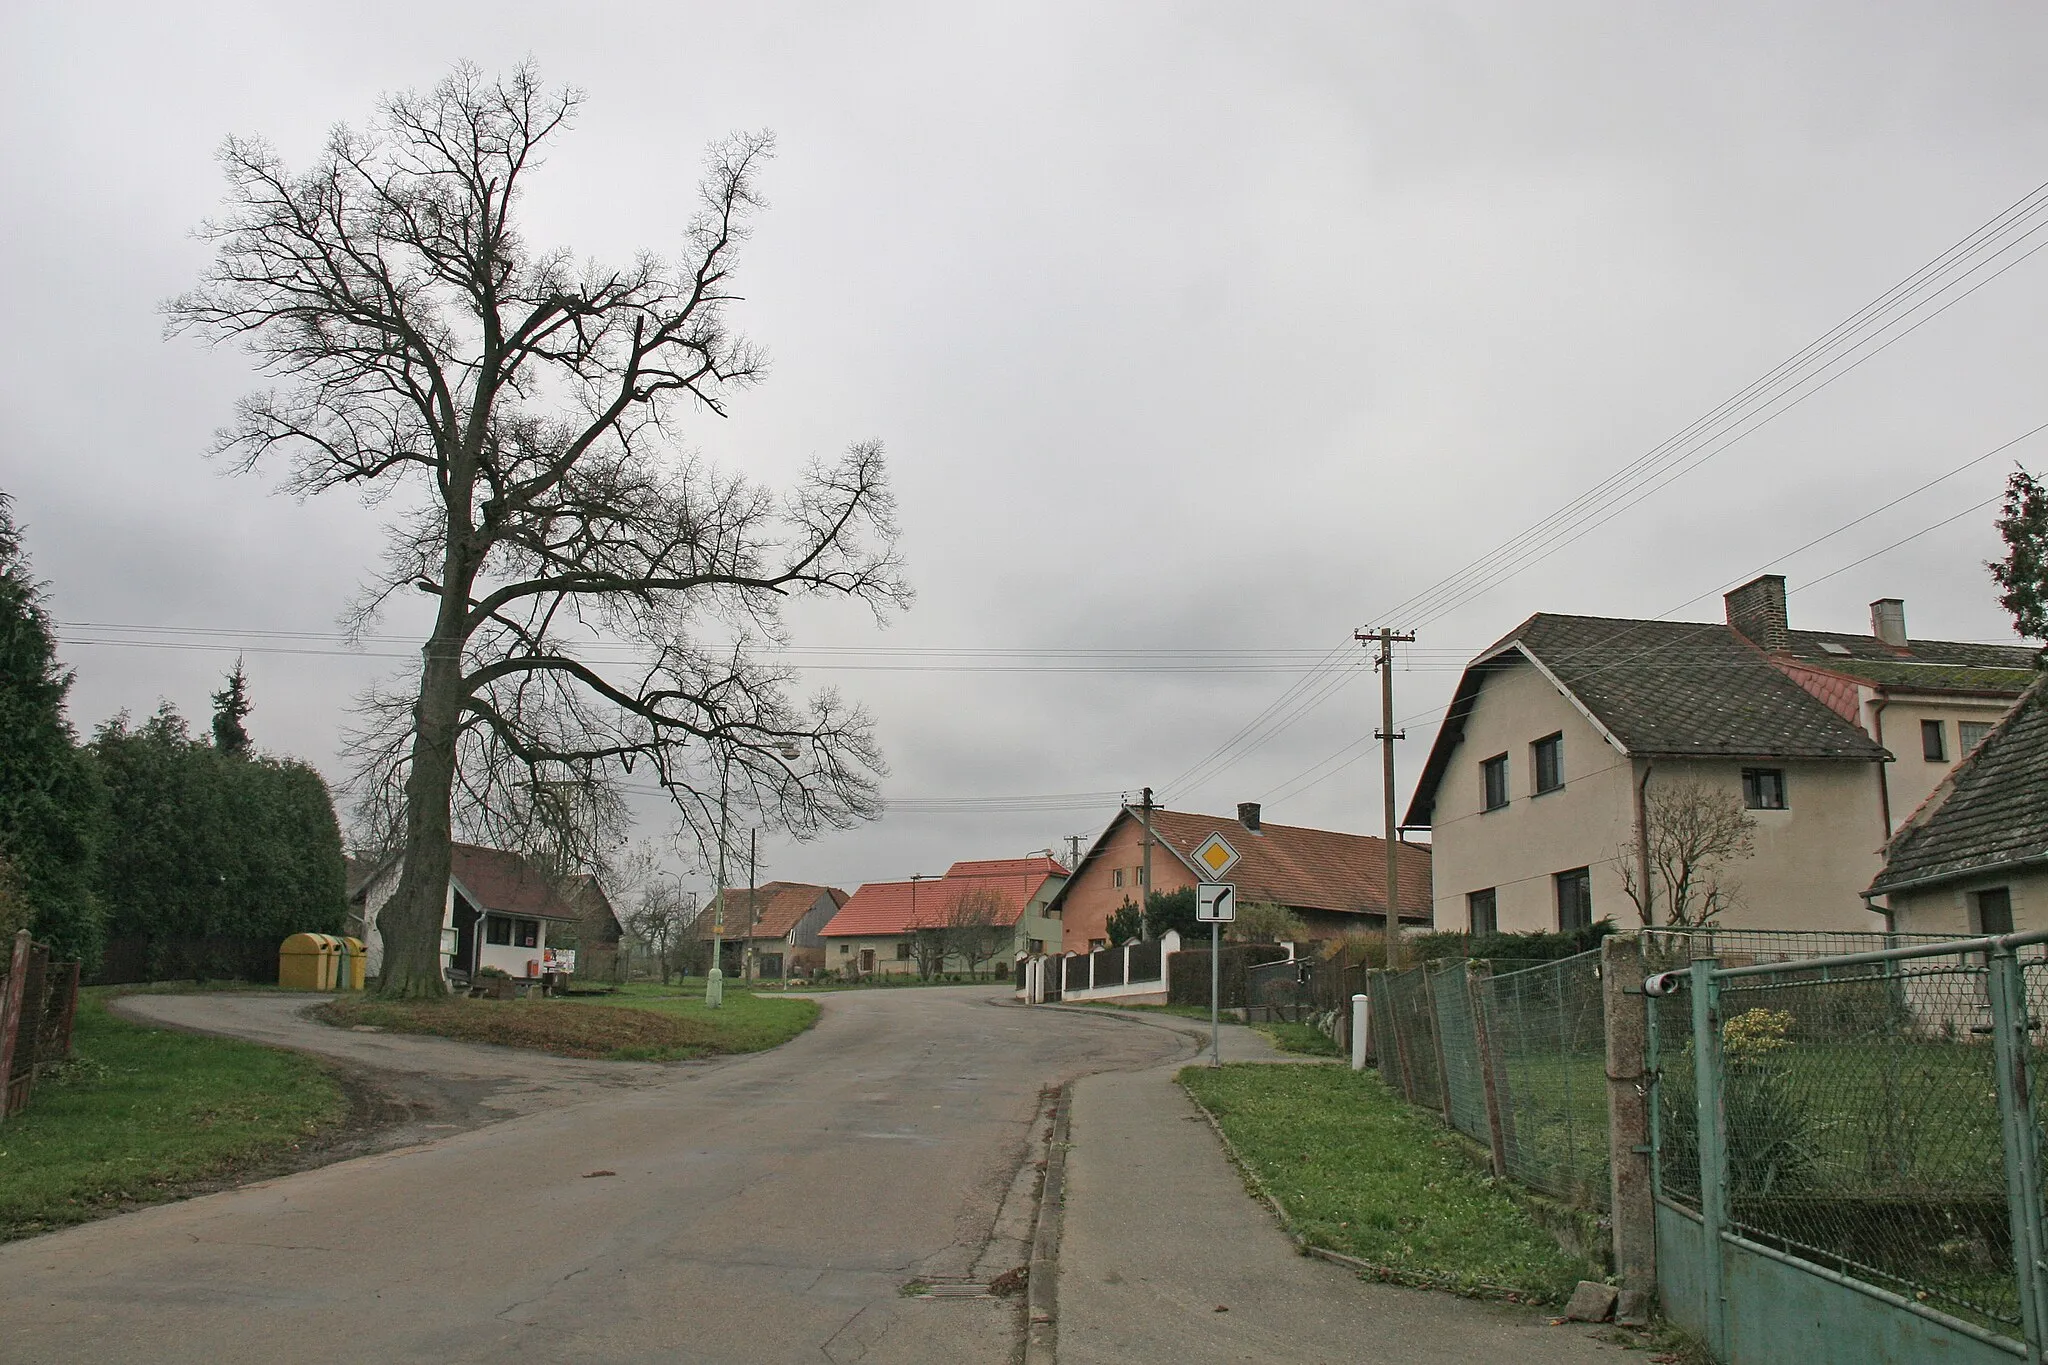 Photo showing: Šiškovice čp. 36
Camera location 49° 52′ 49.94″ N, 15° 46′ 07.62″ E View this and other nearby images on: OpenStreetMap 49.880540;   15.768782

This file was created as a part of the photographic program of Wikimedia Czech Republic. Project: Foto českých obcí The program supports Wikimedia Commons photographers in the Czech Republic.